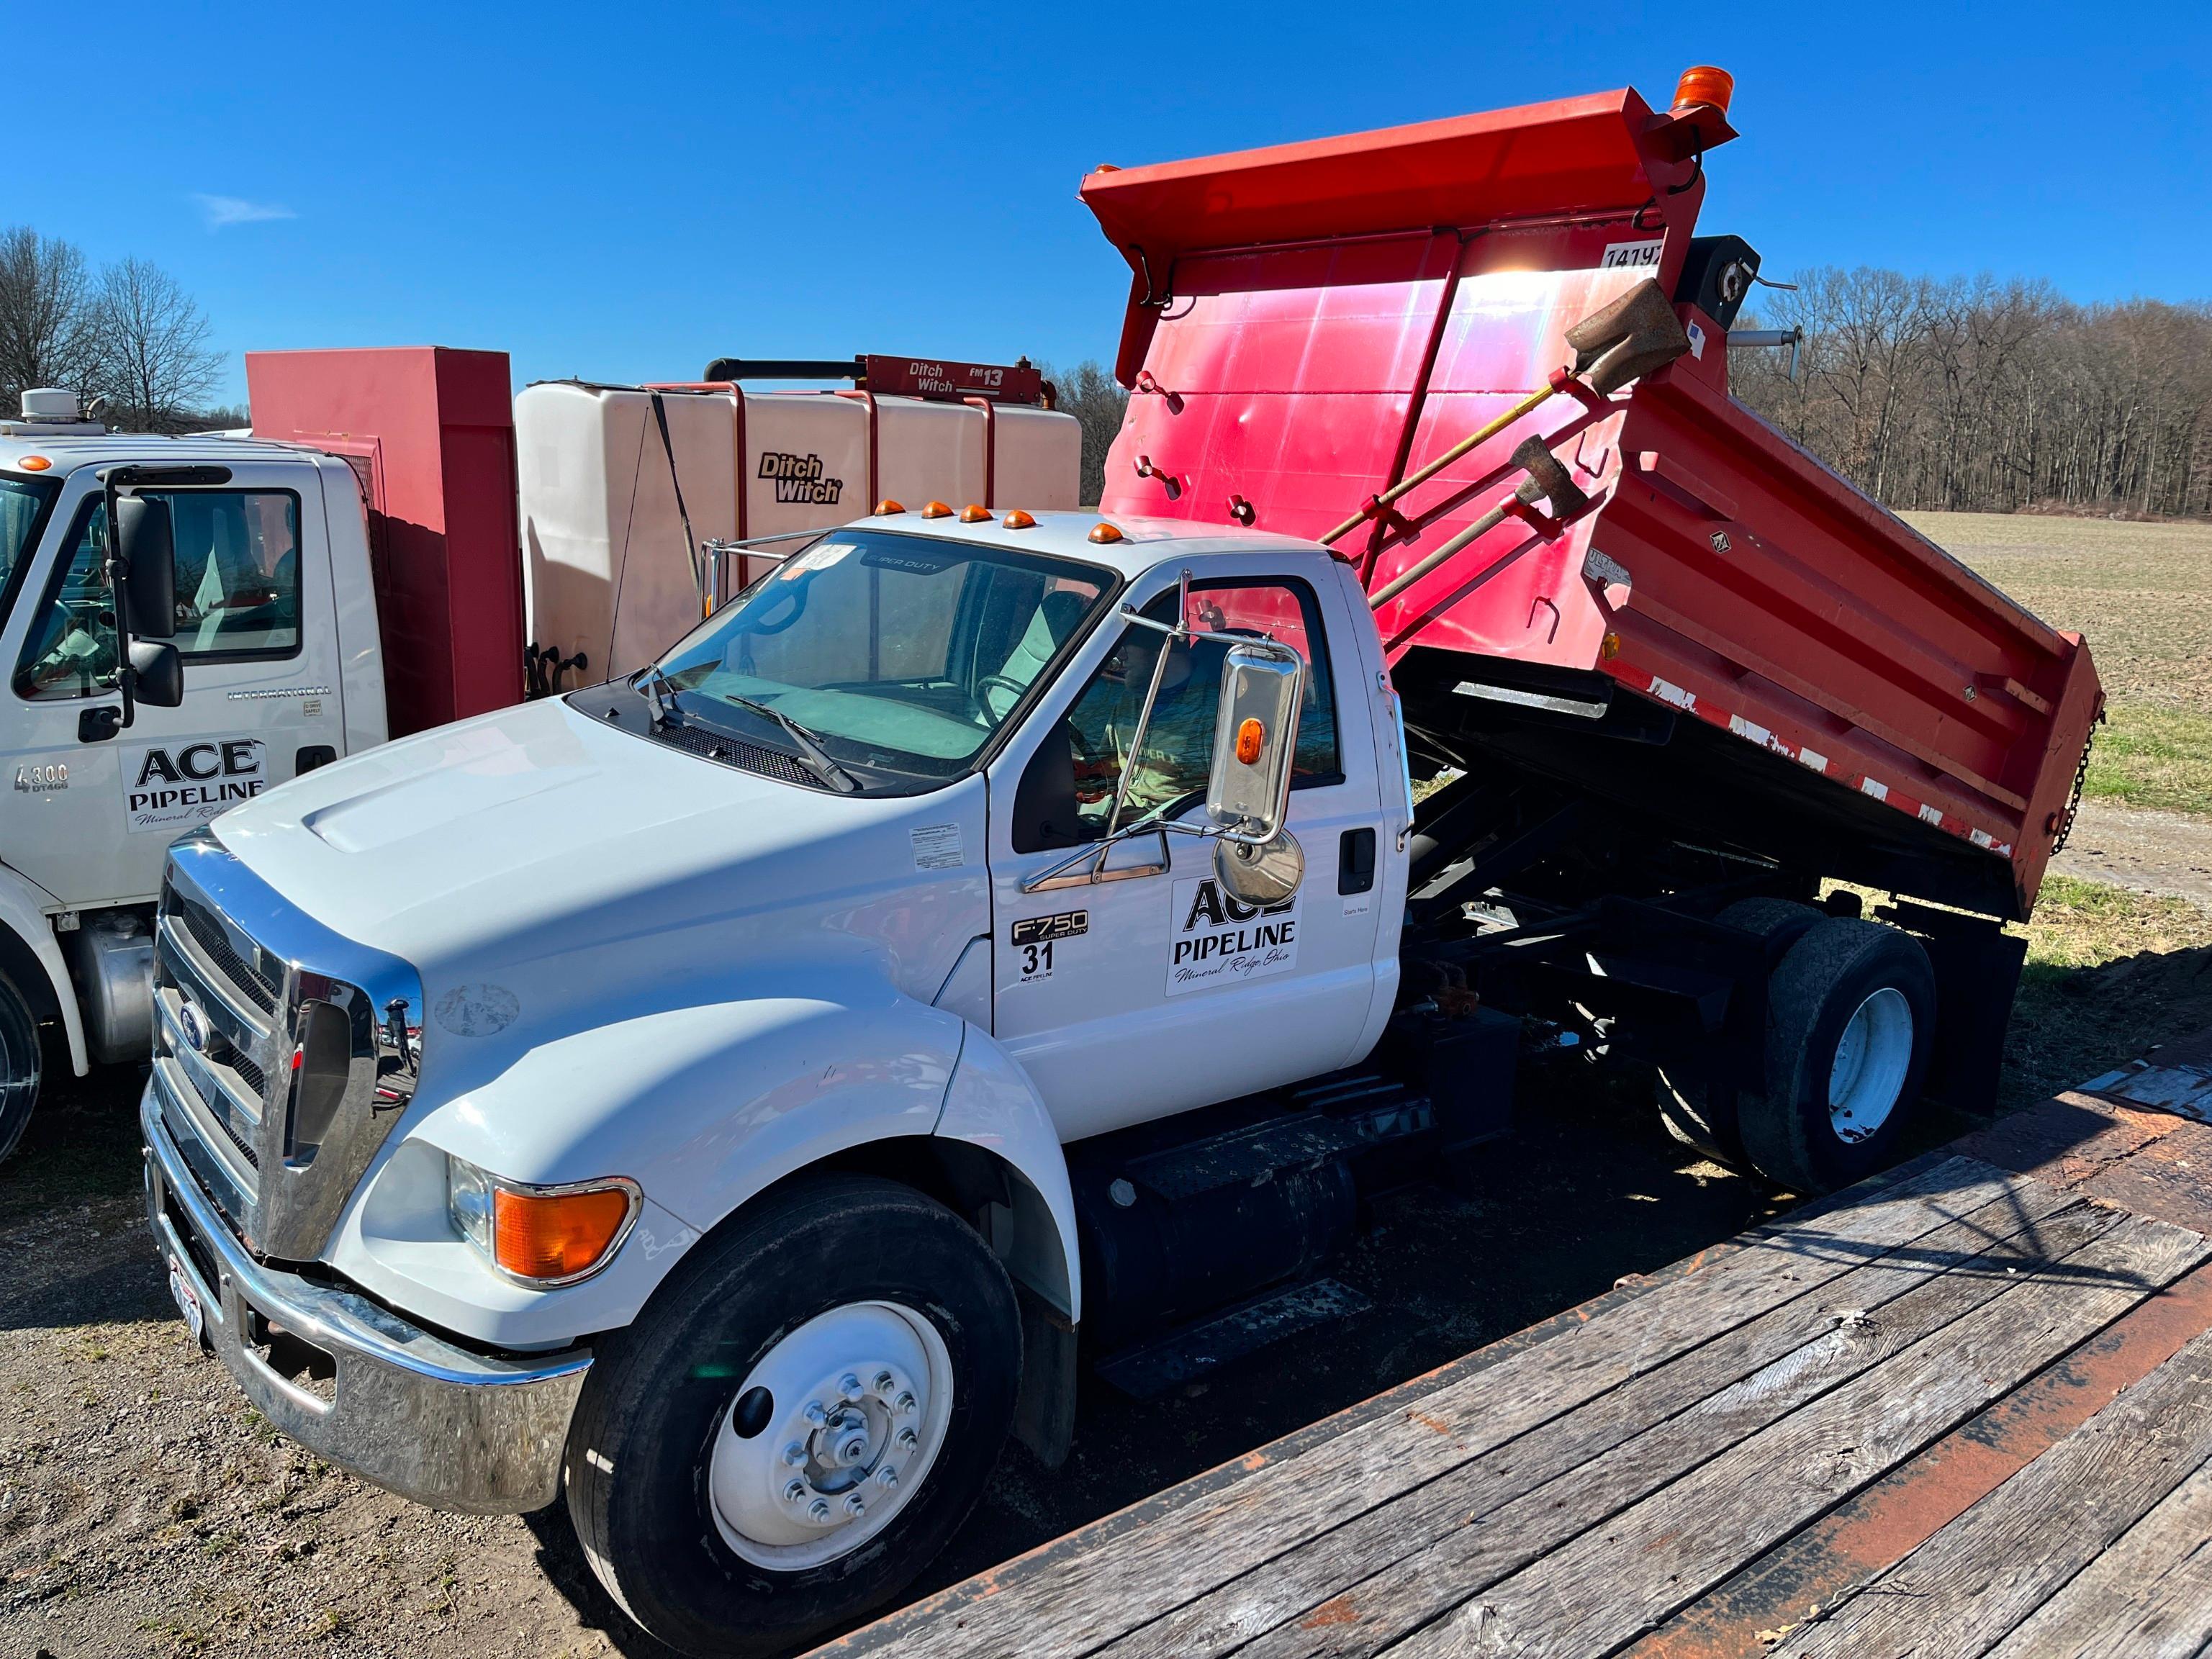 2010 FORD F750XL DUMP TRUCK VN:3FRXF7FE8AV274275 powered by Cummins diesel engine, equipped with 7